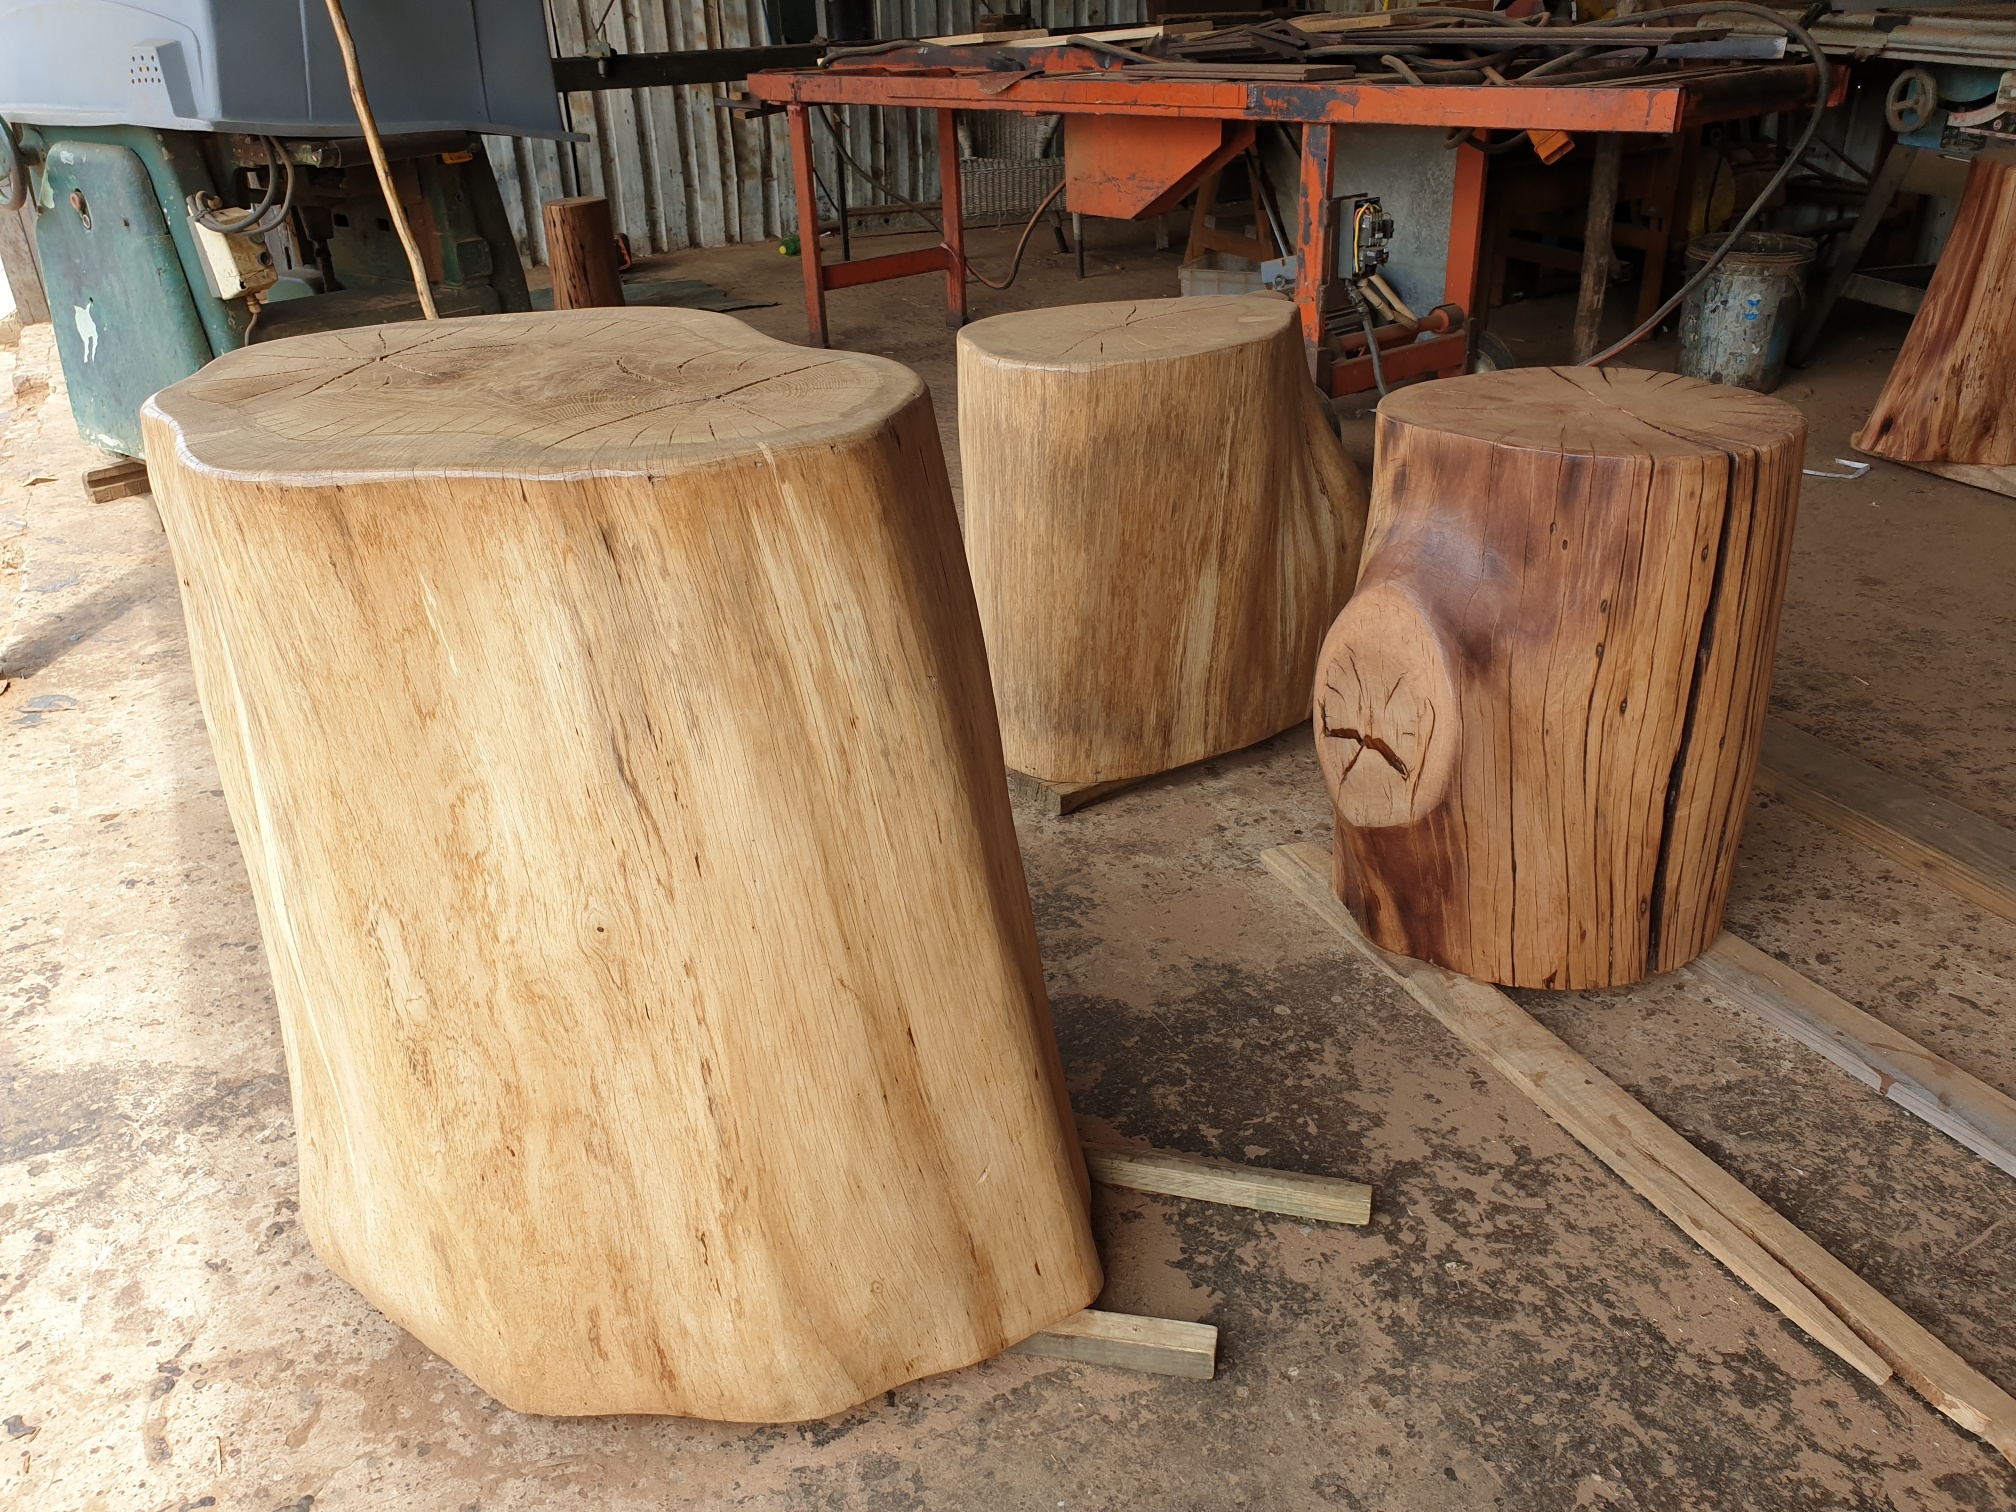 Slabs and side tables